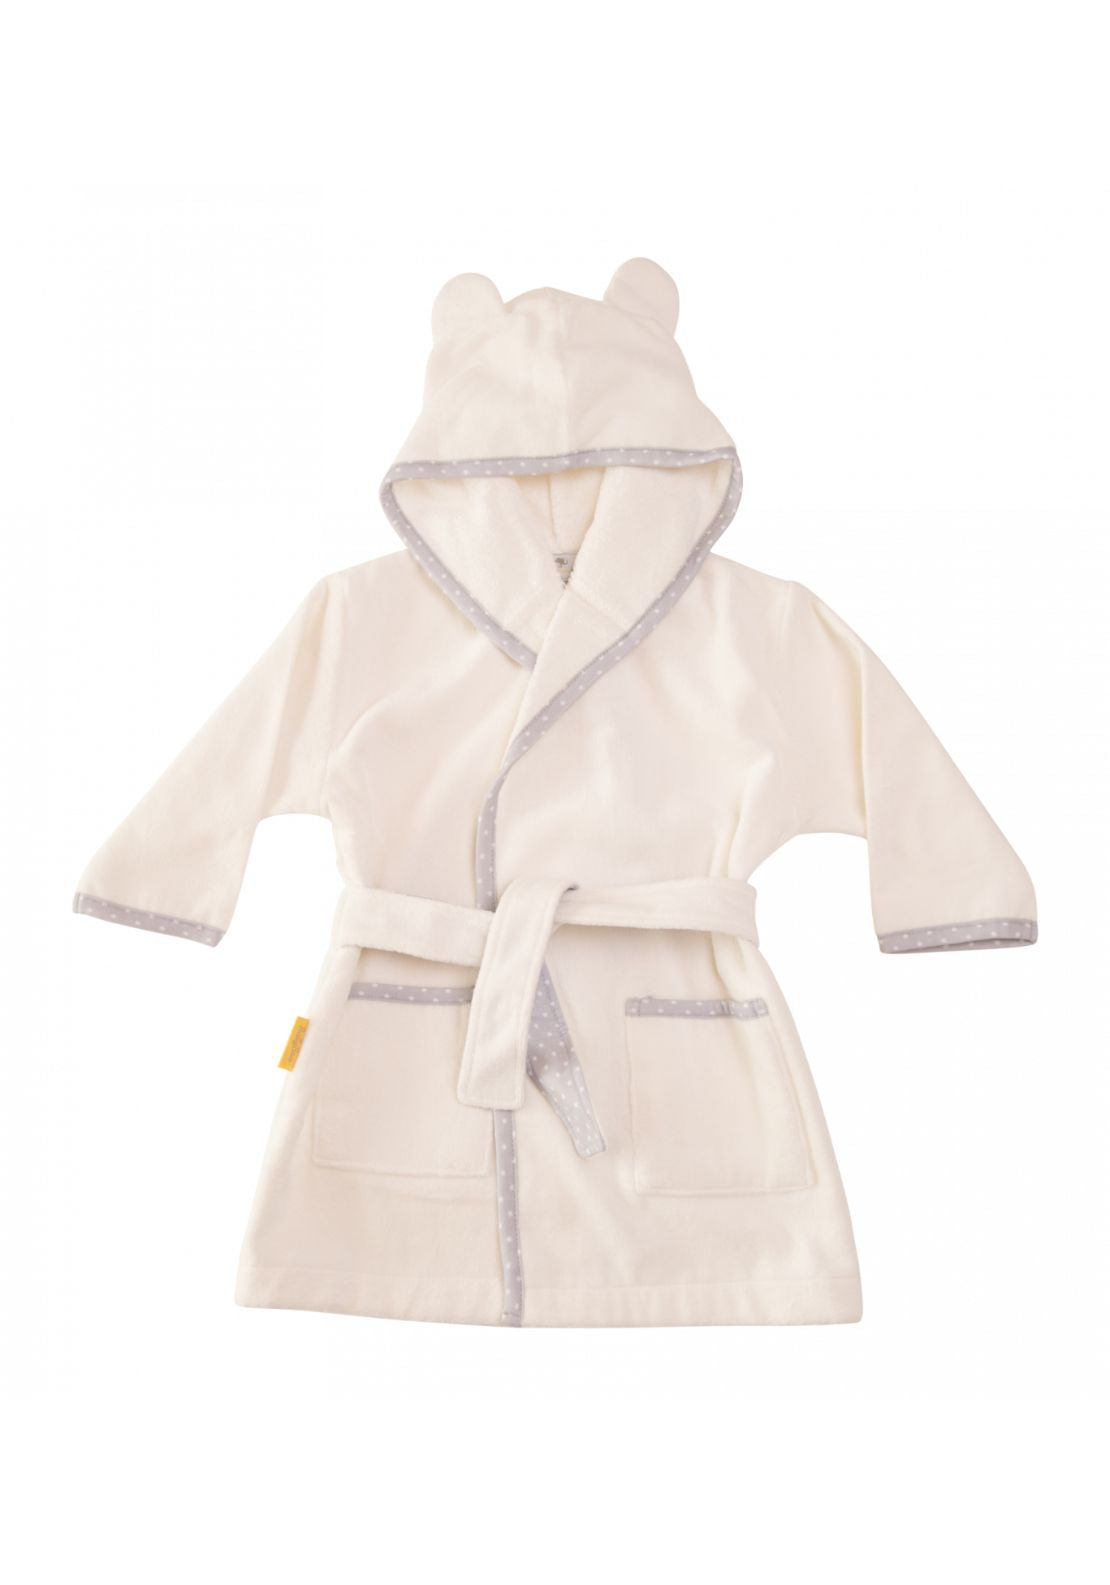 Babyboo Cozyboo Robe - White 1 Shaws Department Stores